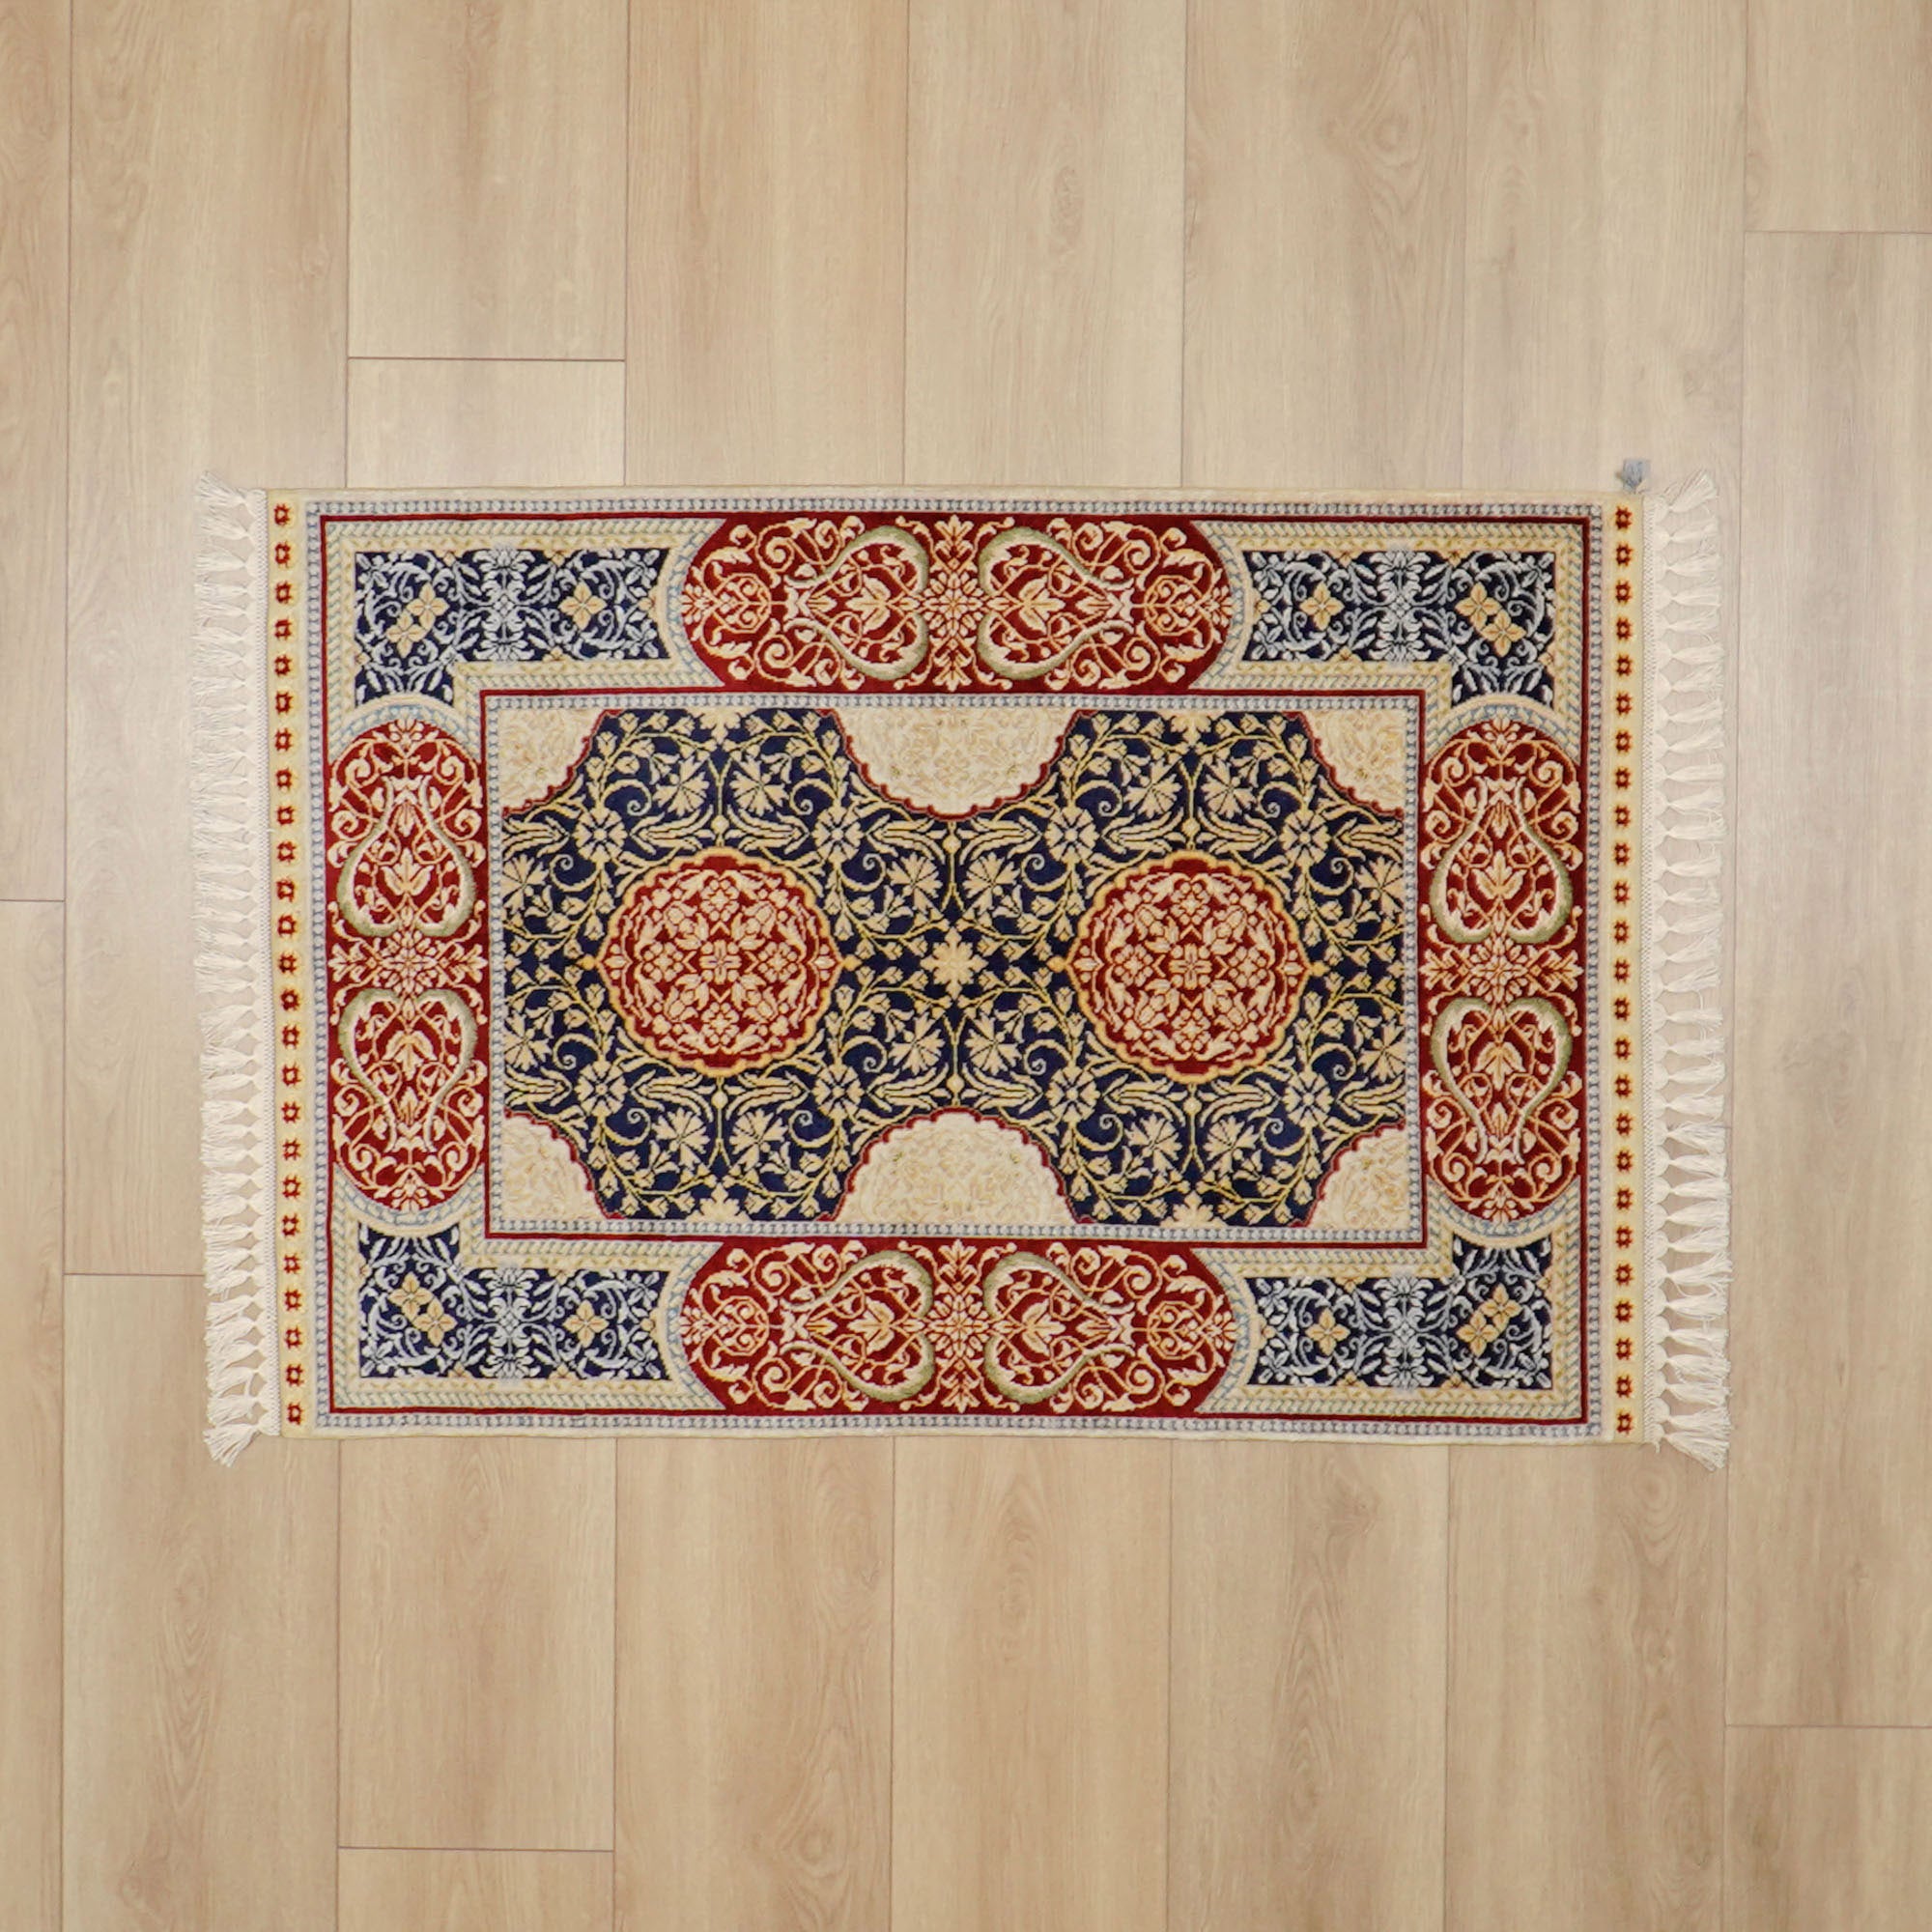 Frame Patterned Hand-Woven Red Silk Classic Carpet